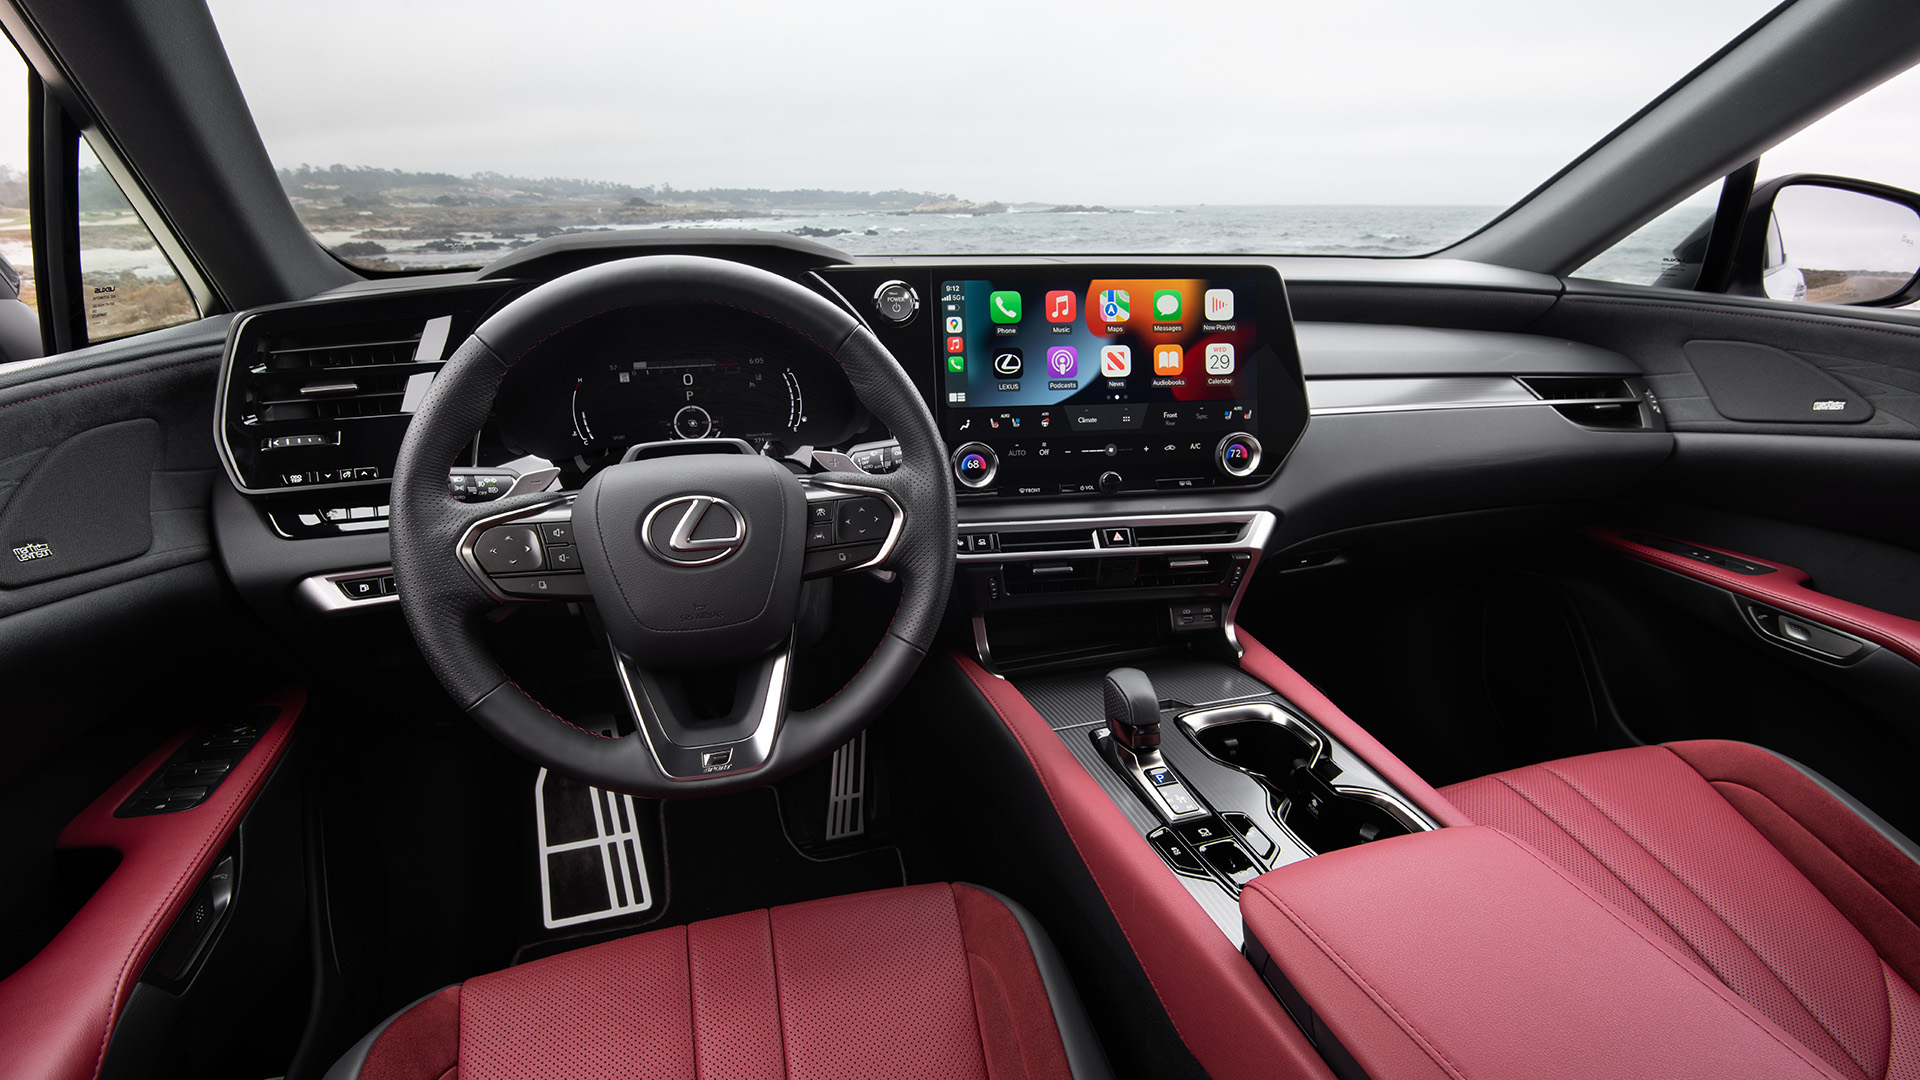 The interior of the RX showing off the red seats and trim, as well as the steering wheel, controls and touchscreen.